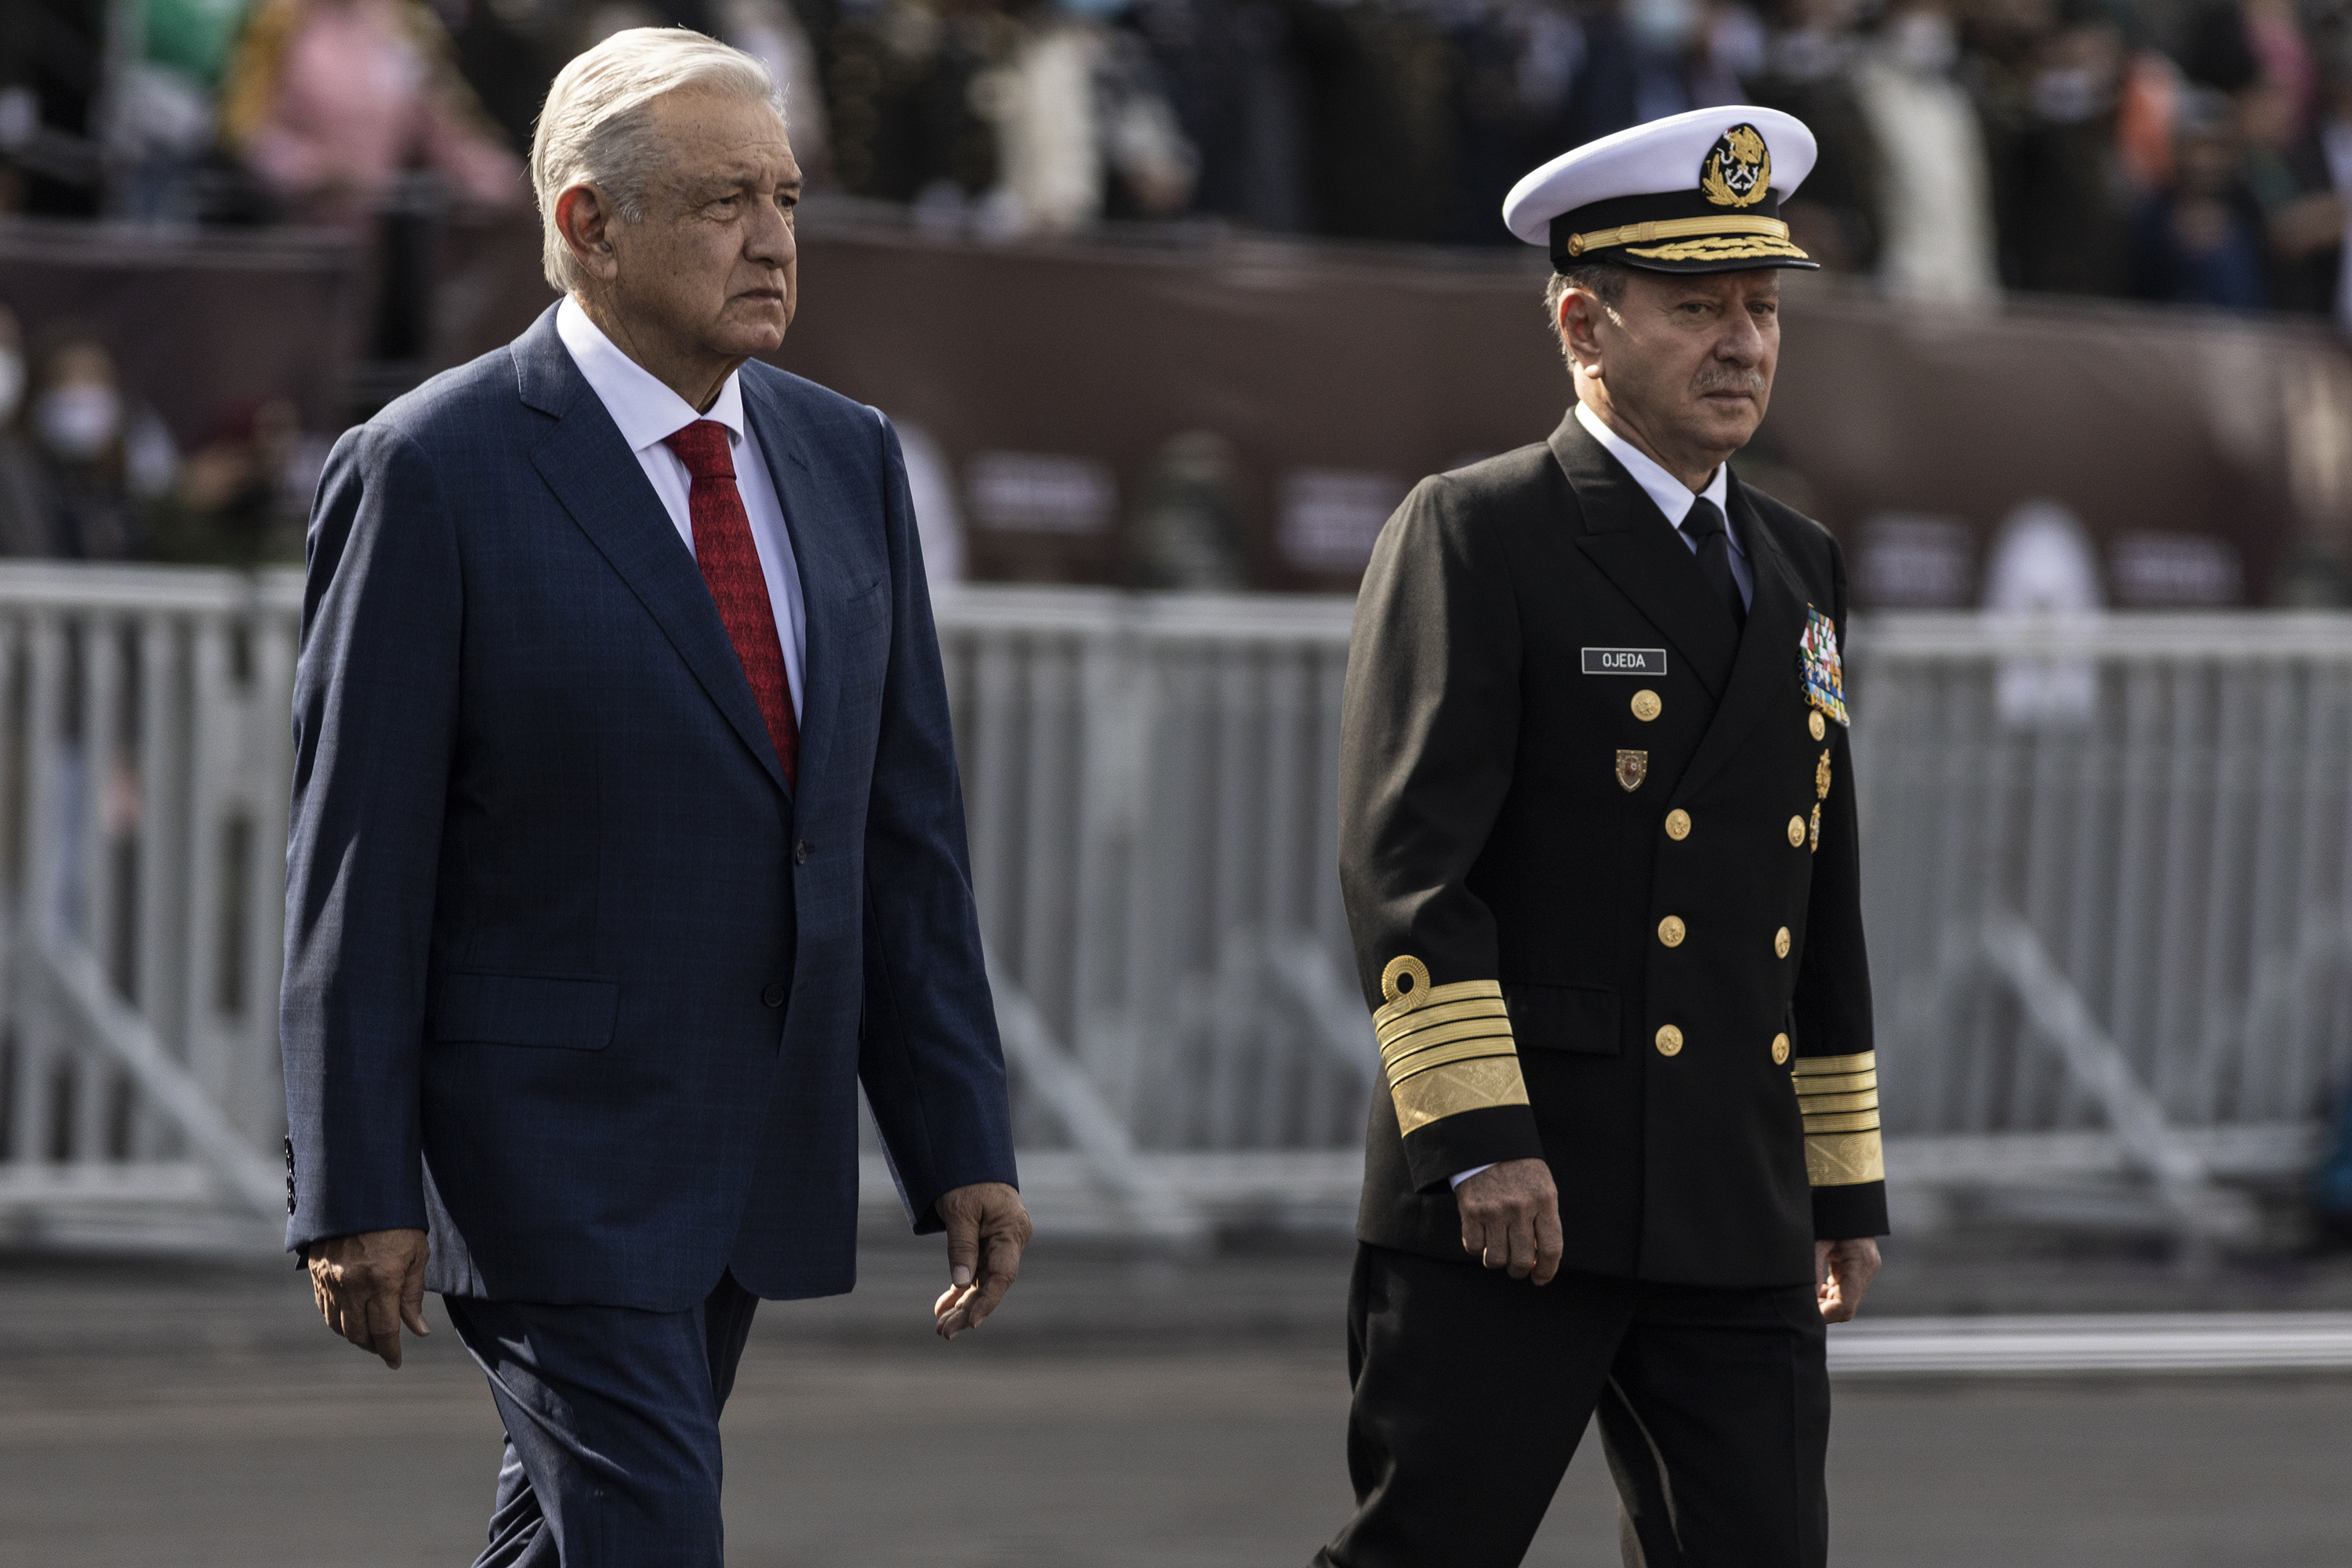 President of Mexico, Andrés Manuel López Obrador, left, walks with Secretary of the Navy, José Rafael Ojeda Durán, during the annual military parade as part of the independence day celebrations at Zocalo in Mexico City, Mexico on Friday.